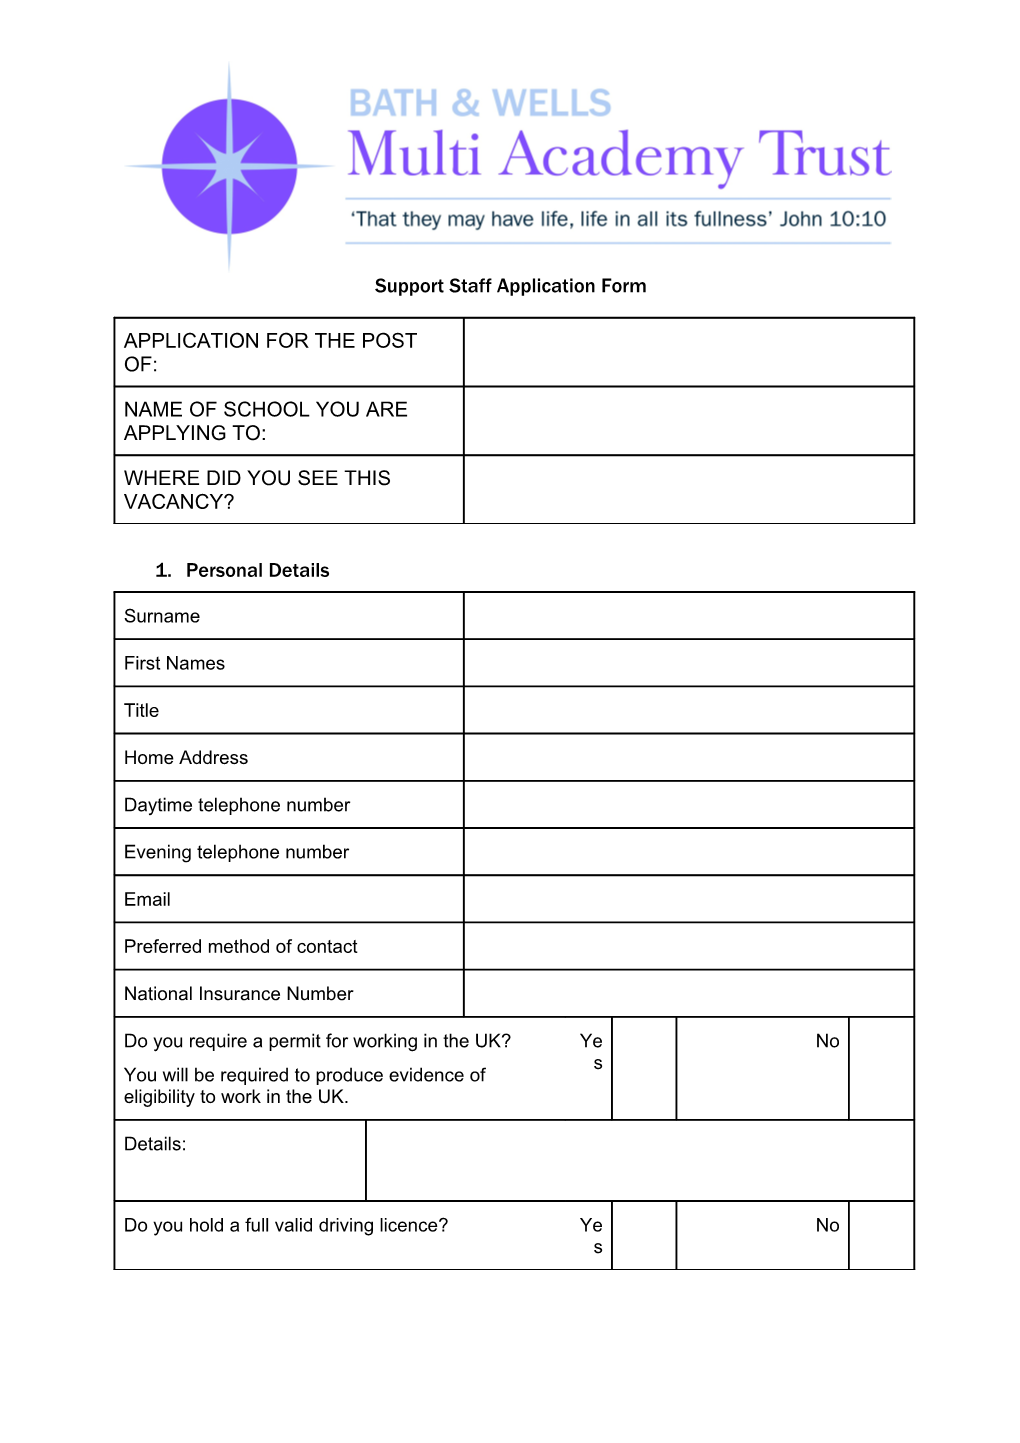 Support Staff Application Form s4